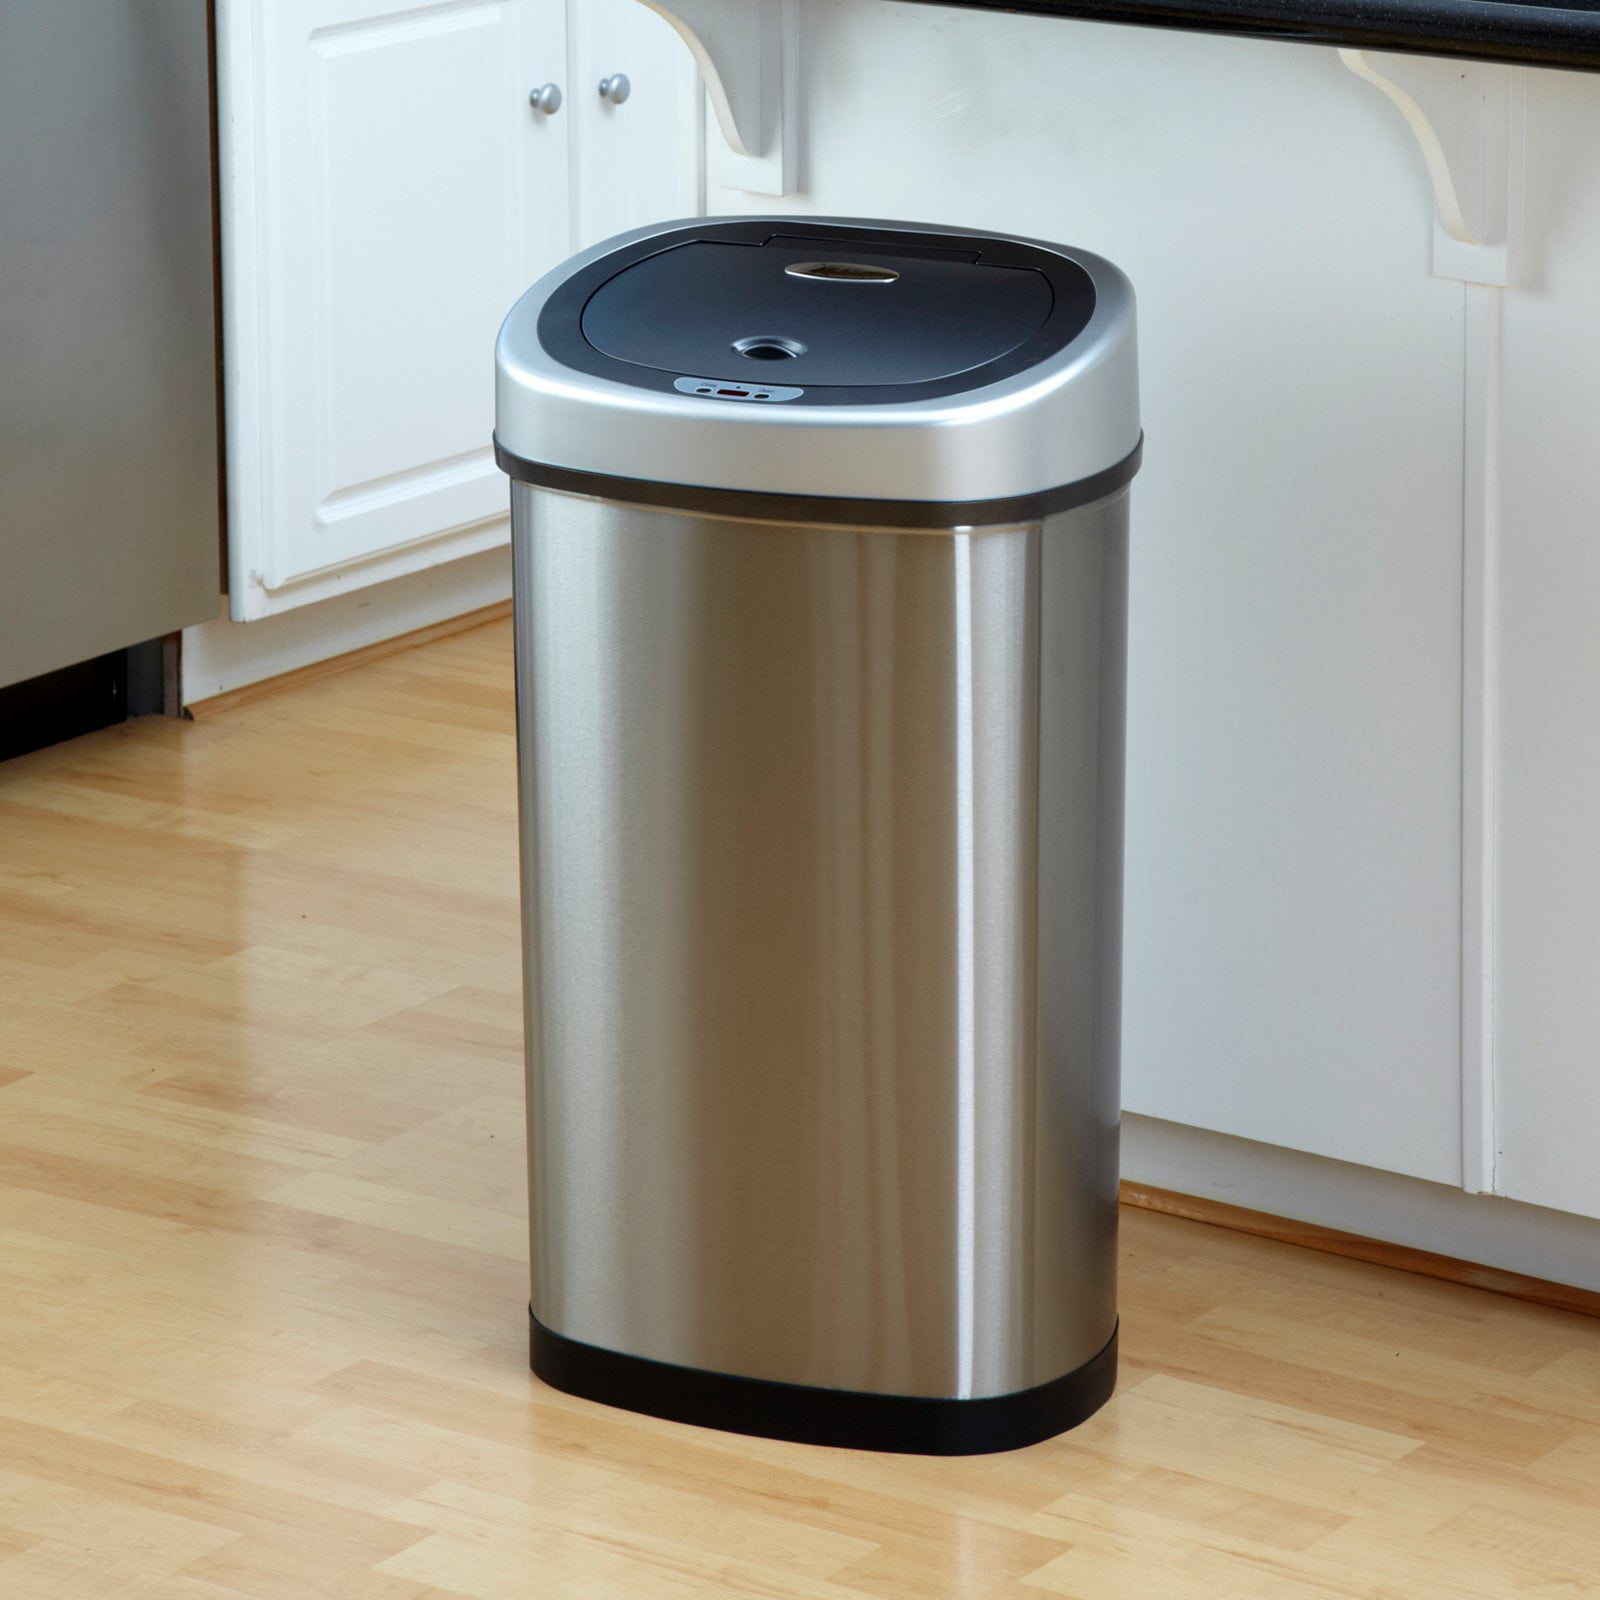 Nine Stars DZT-50-9 Touchless Stainless Steel 13.2 Gallon Trash Can Garbage Cans Walmart Stainless Steel